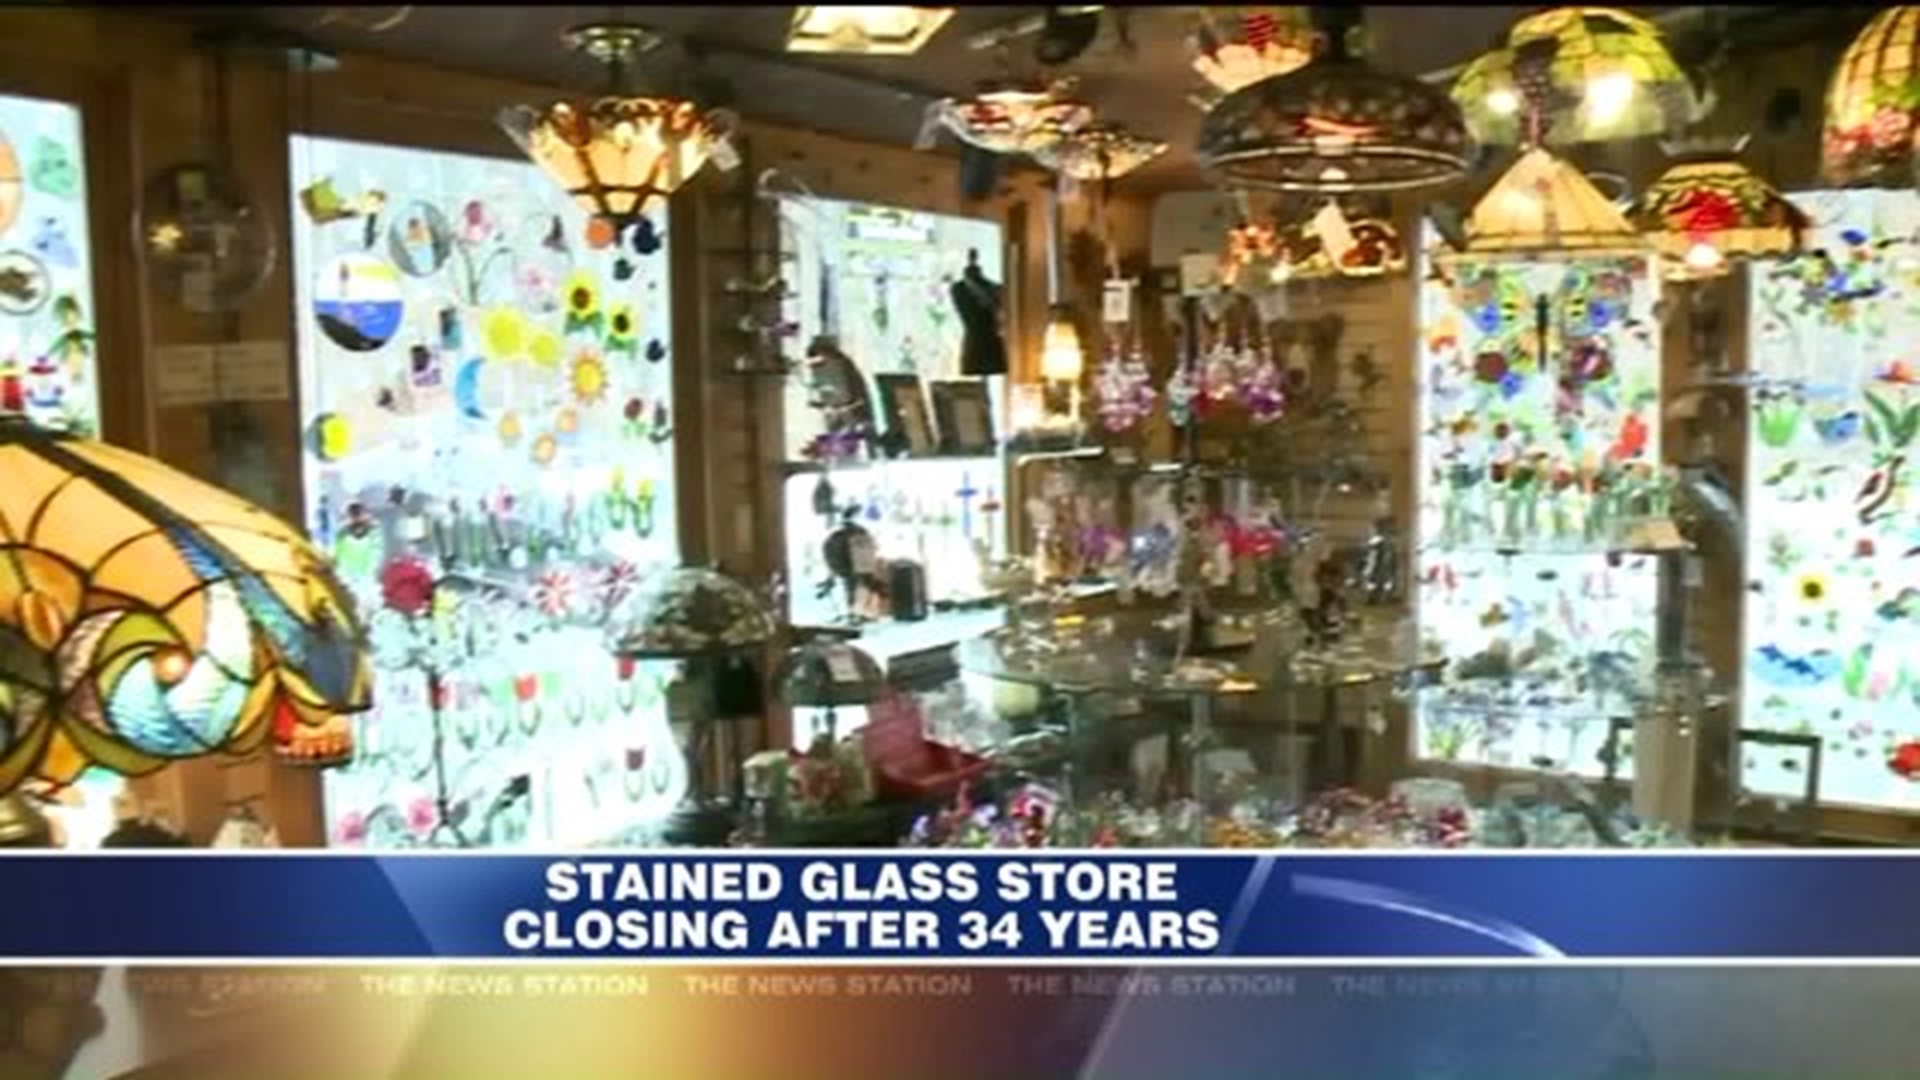 Stained Glass Store Closing after 34 Years